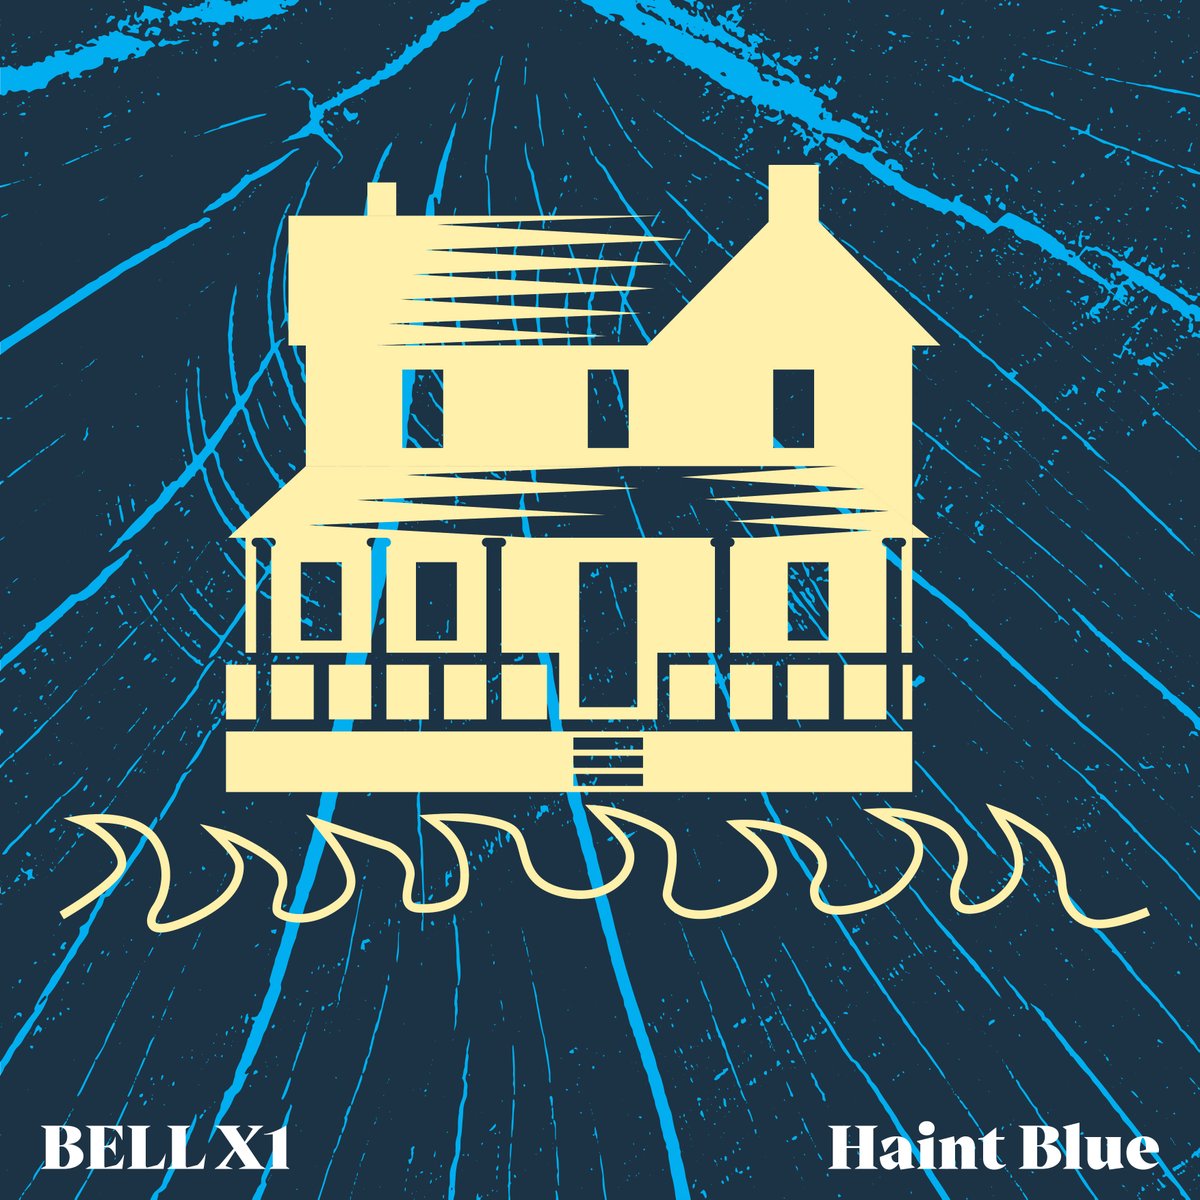 Haint Blue The new single Out now songwhip.com/bell-x1/haint-…